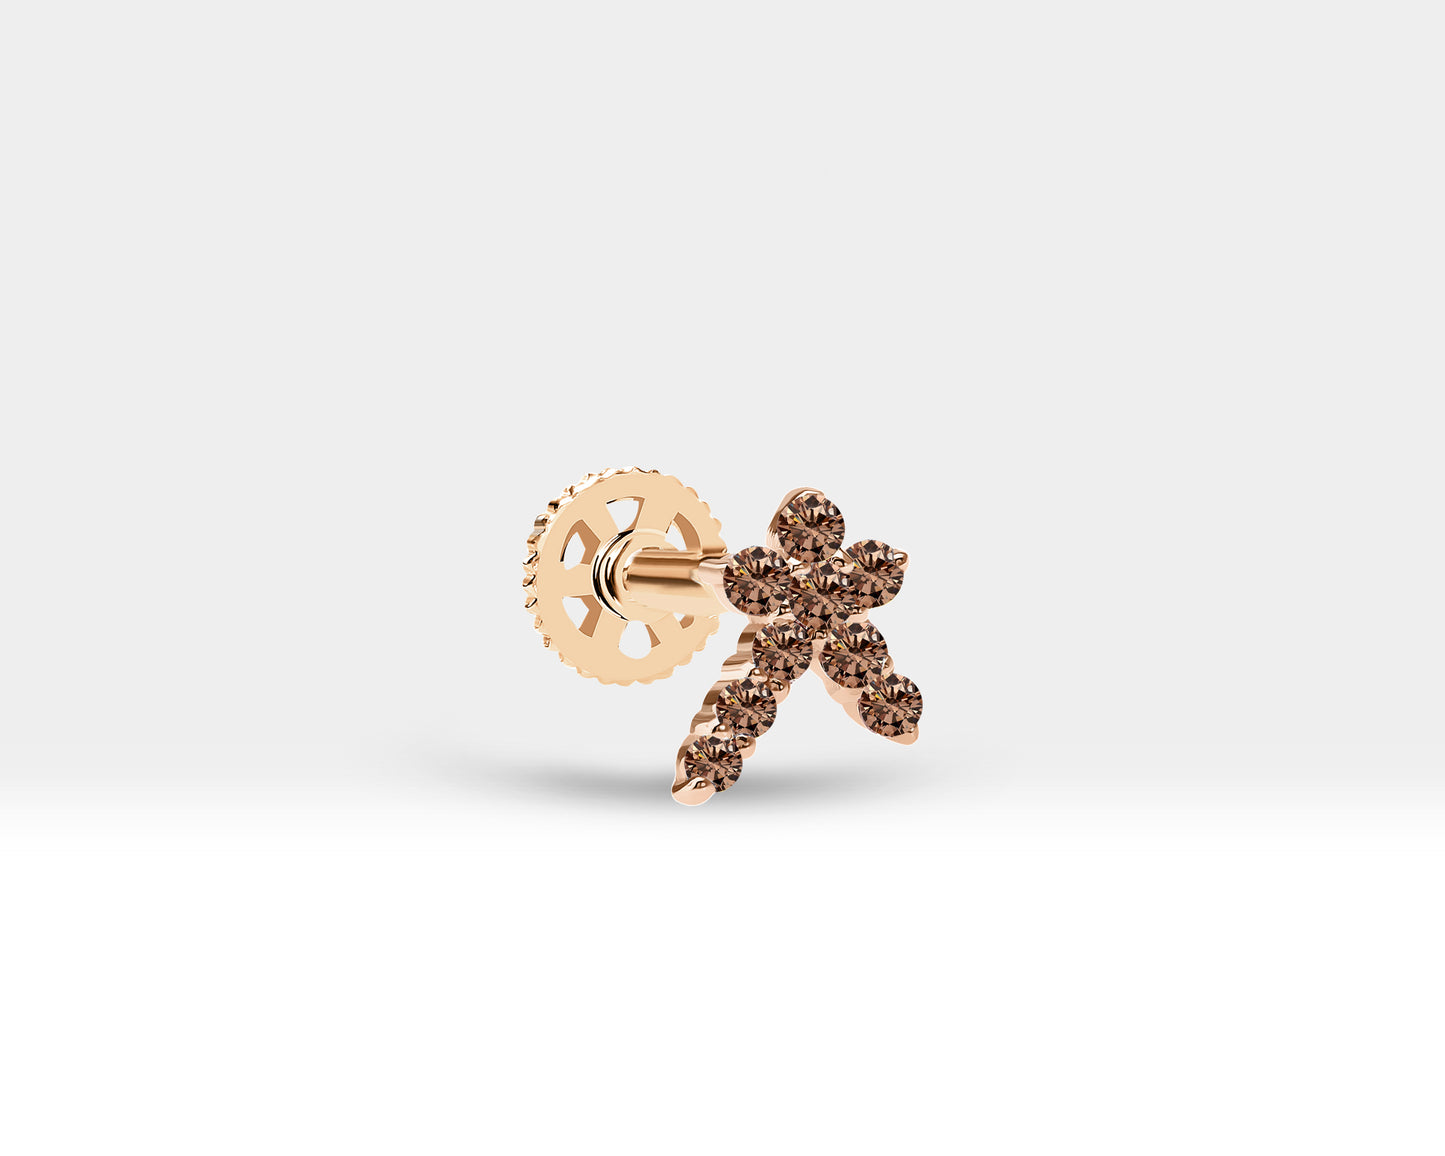 Starburst Piercing with Brown Diamond Cartilage Tragus Piercing in 14K Solid Gold Celestial Earrings